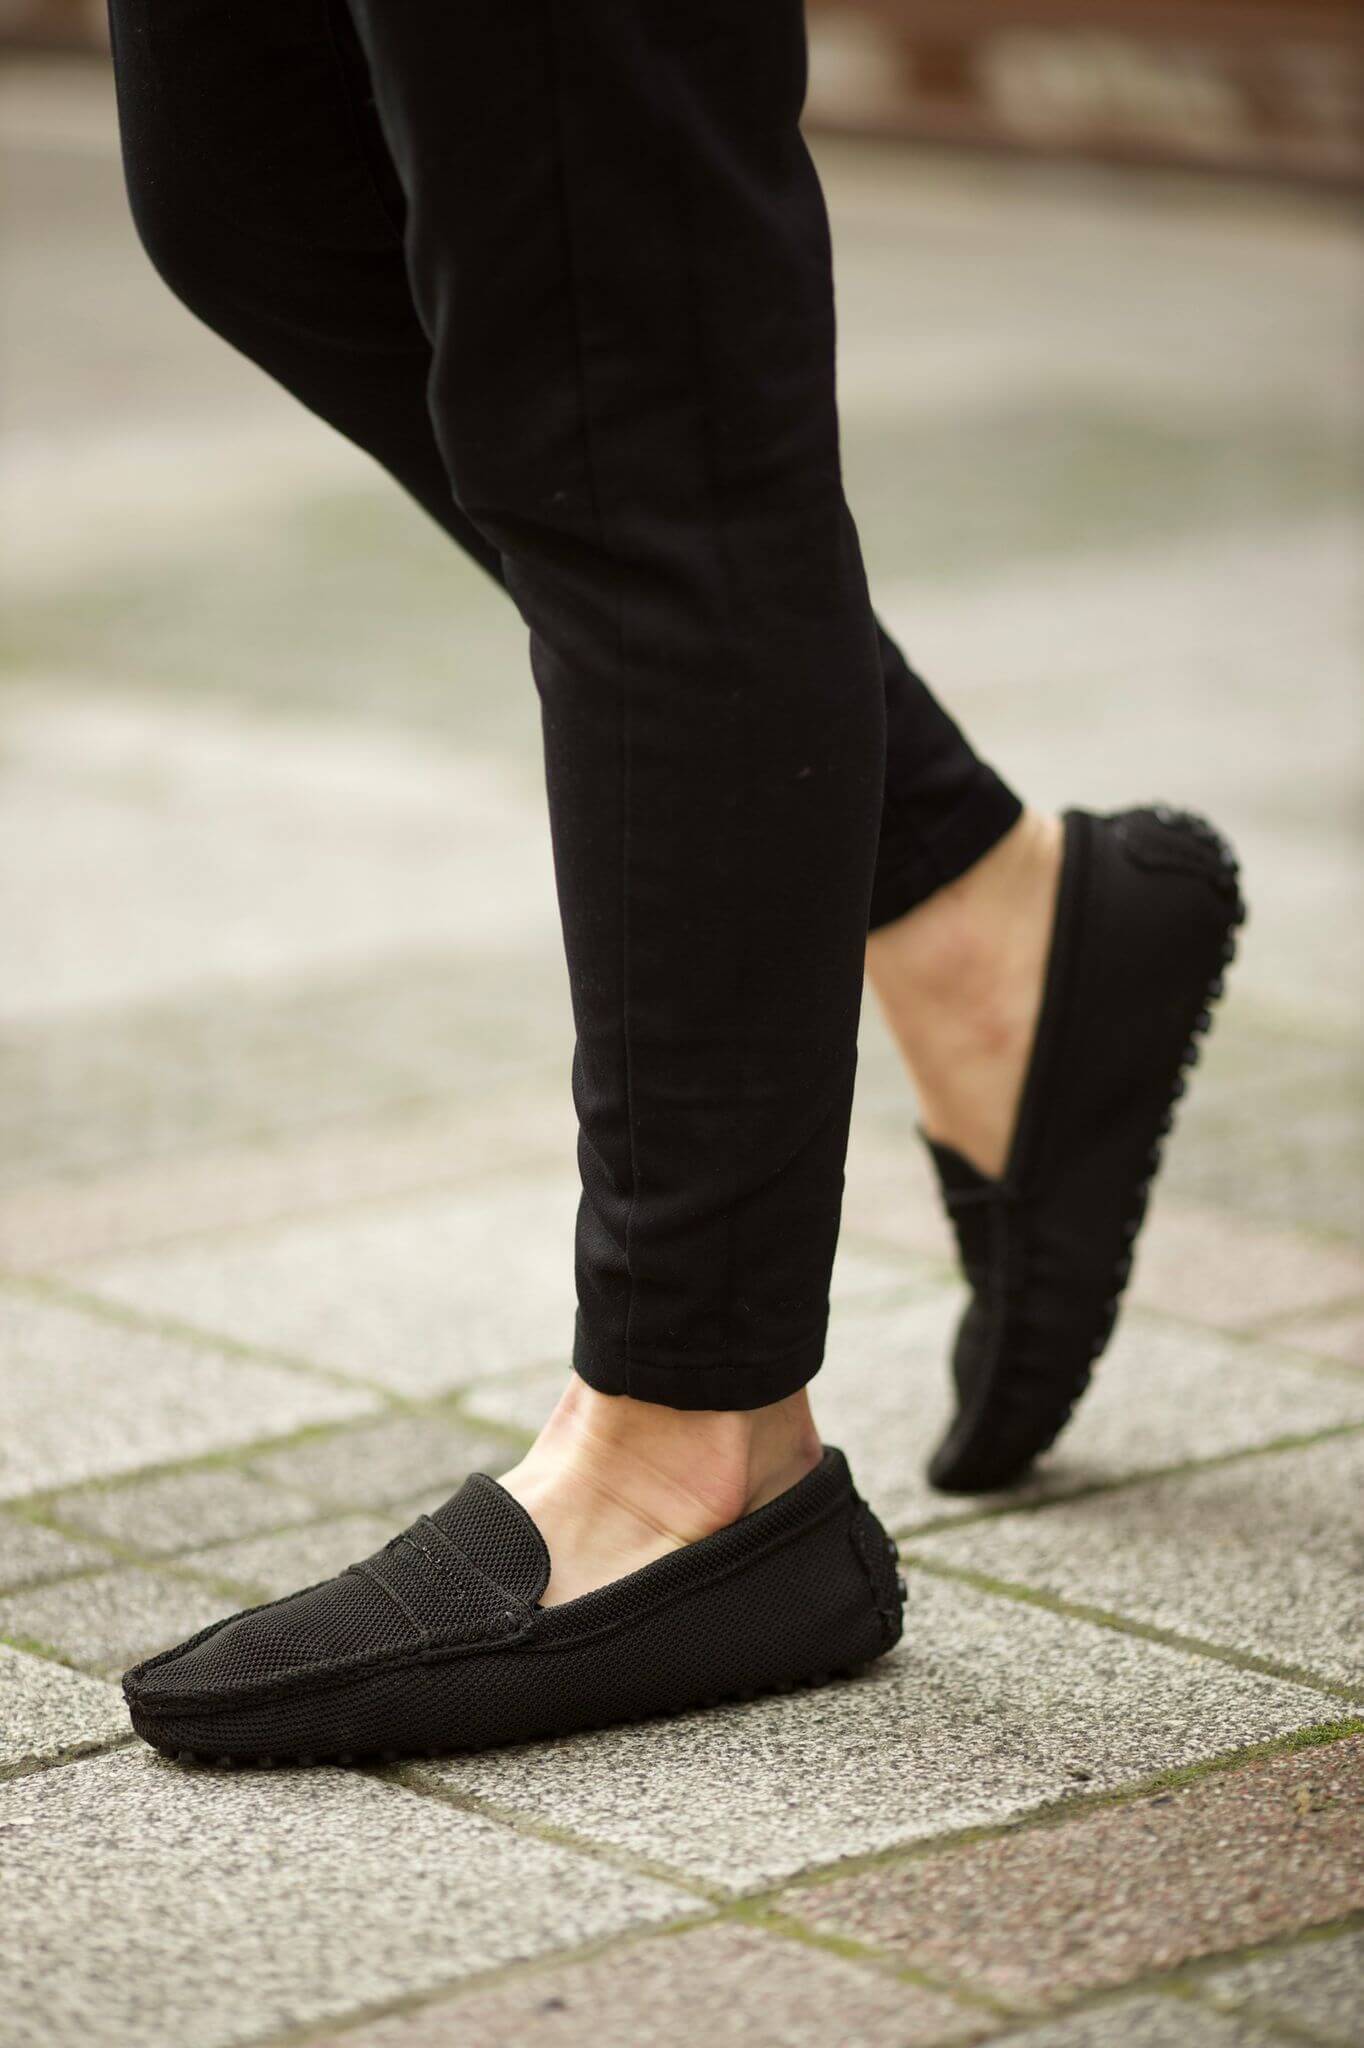 A Black Leather Knitwear Loafer on display.